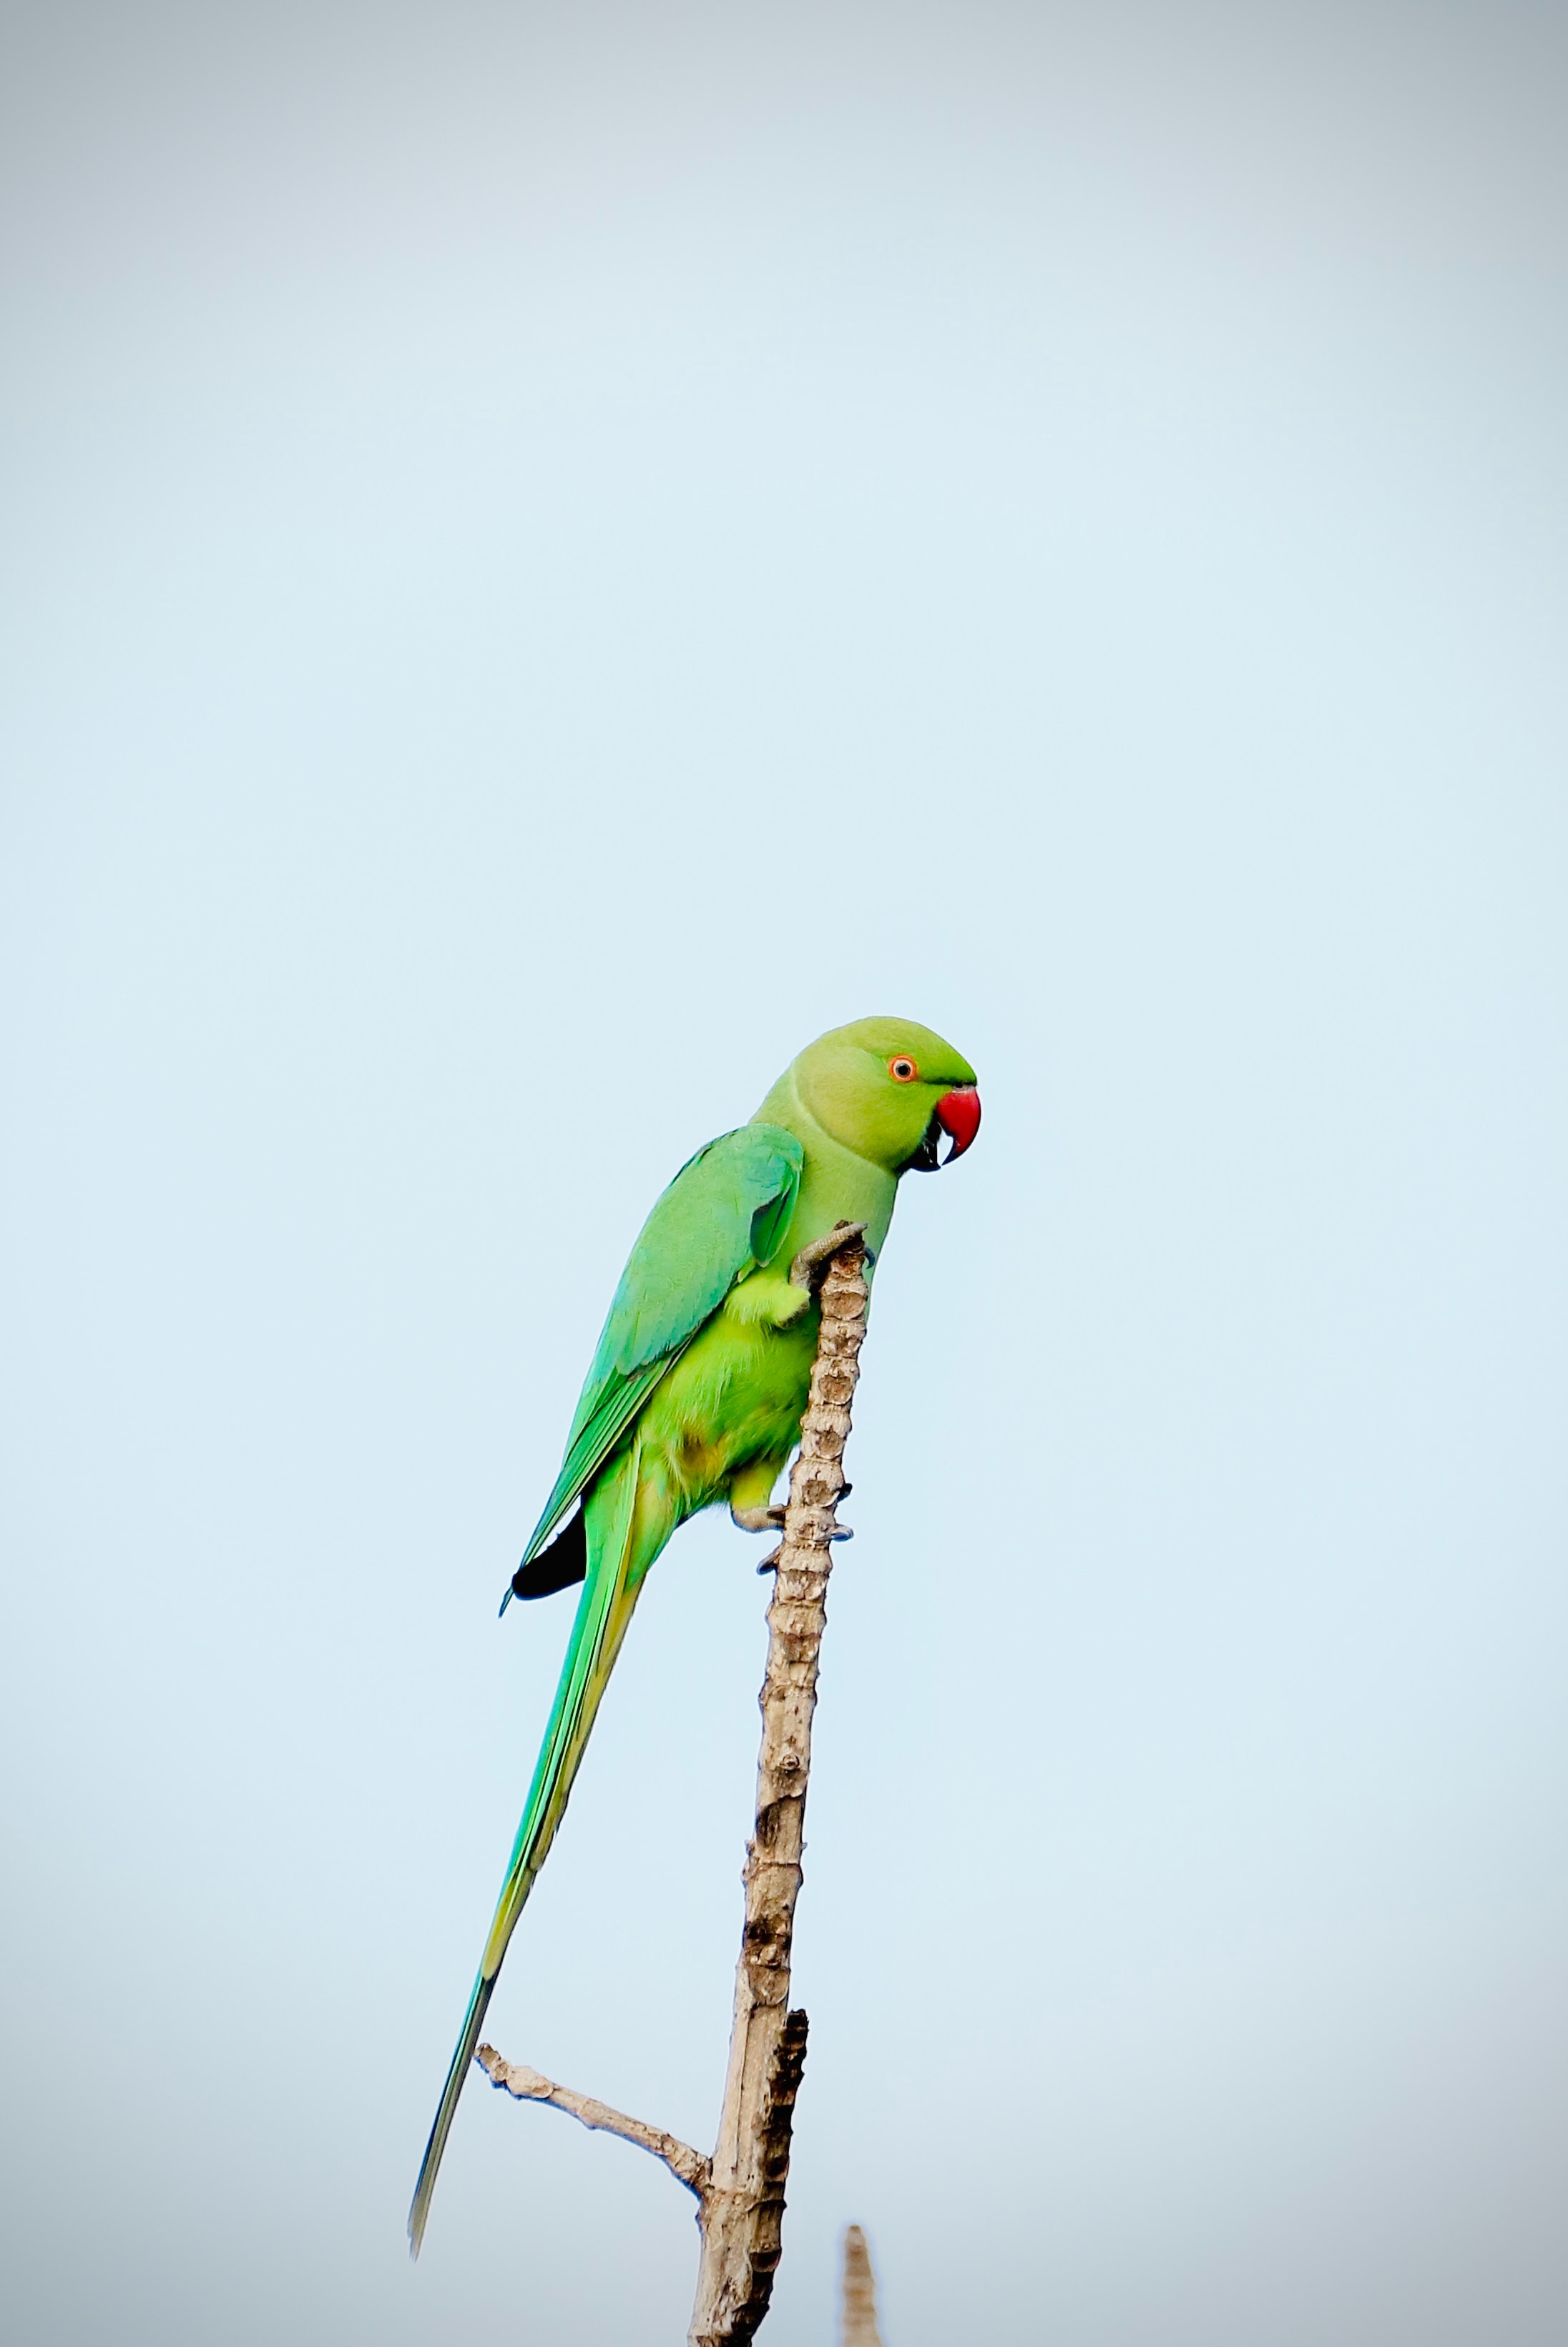 Parrot Wallpapers (40+ images inside)